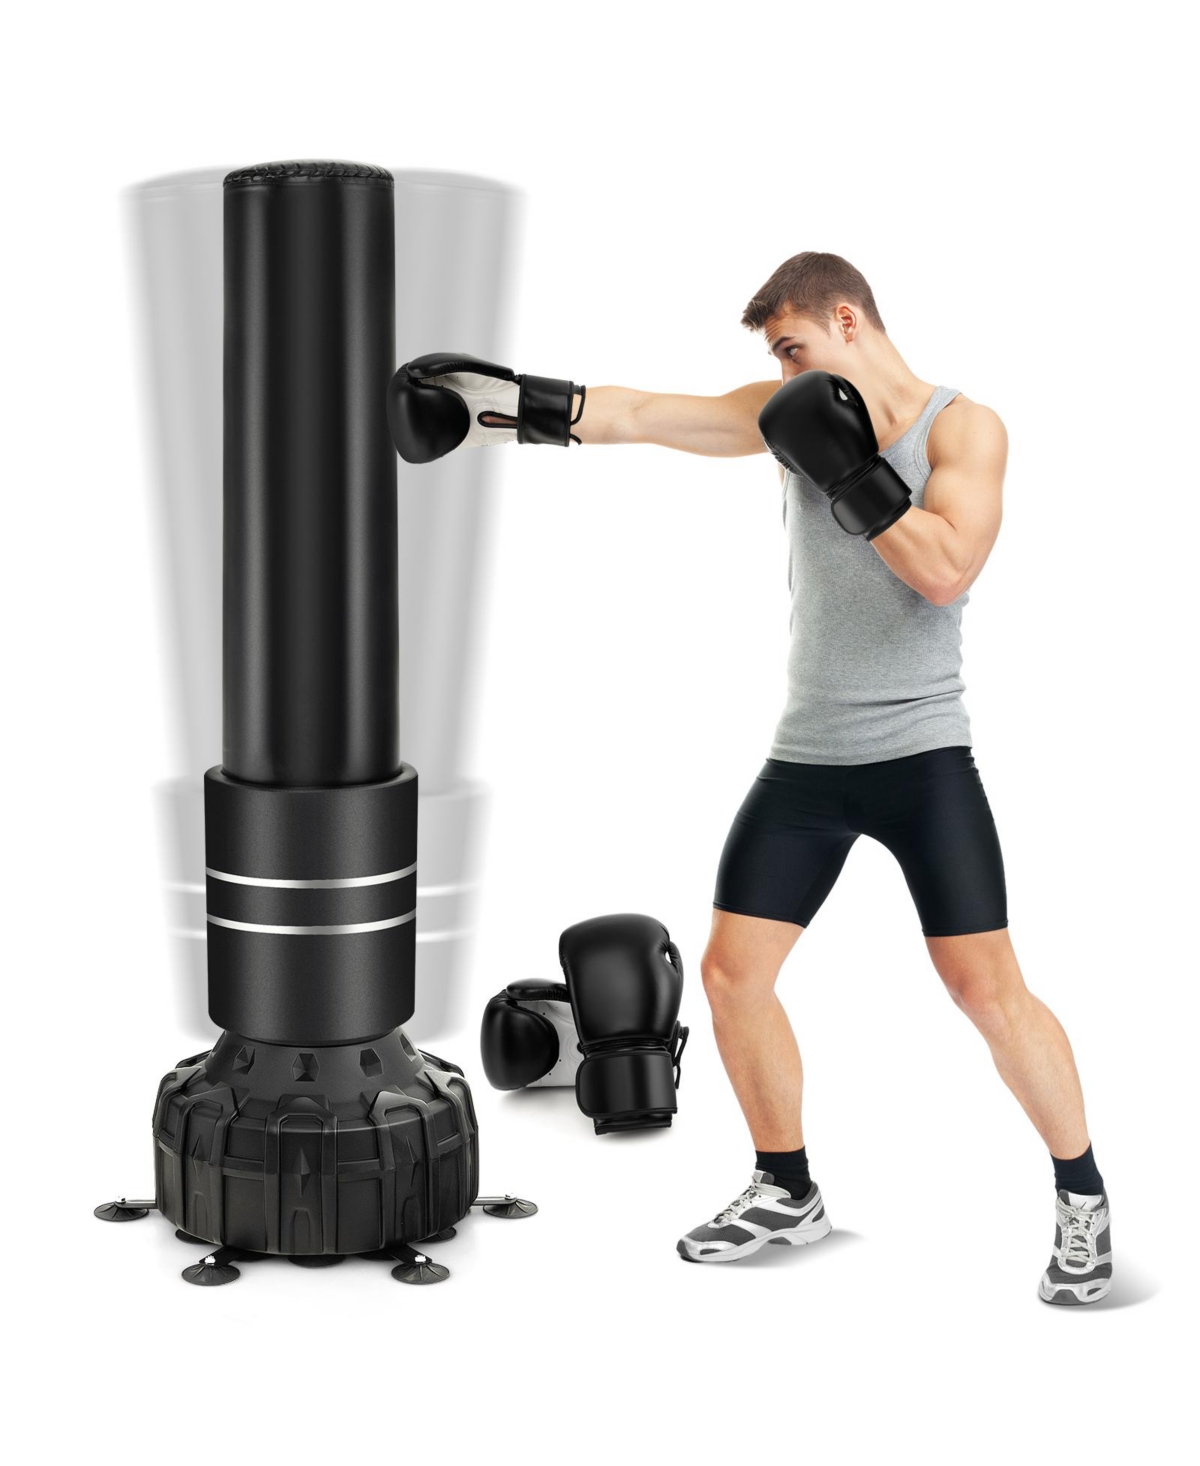 Freestanding Punching Bag 71 Inch Boxing Bag with 25 Suction Cups Gloves and Filling Base - Black